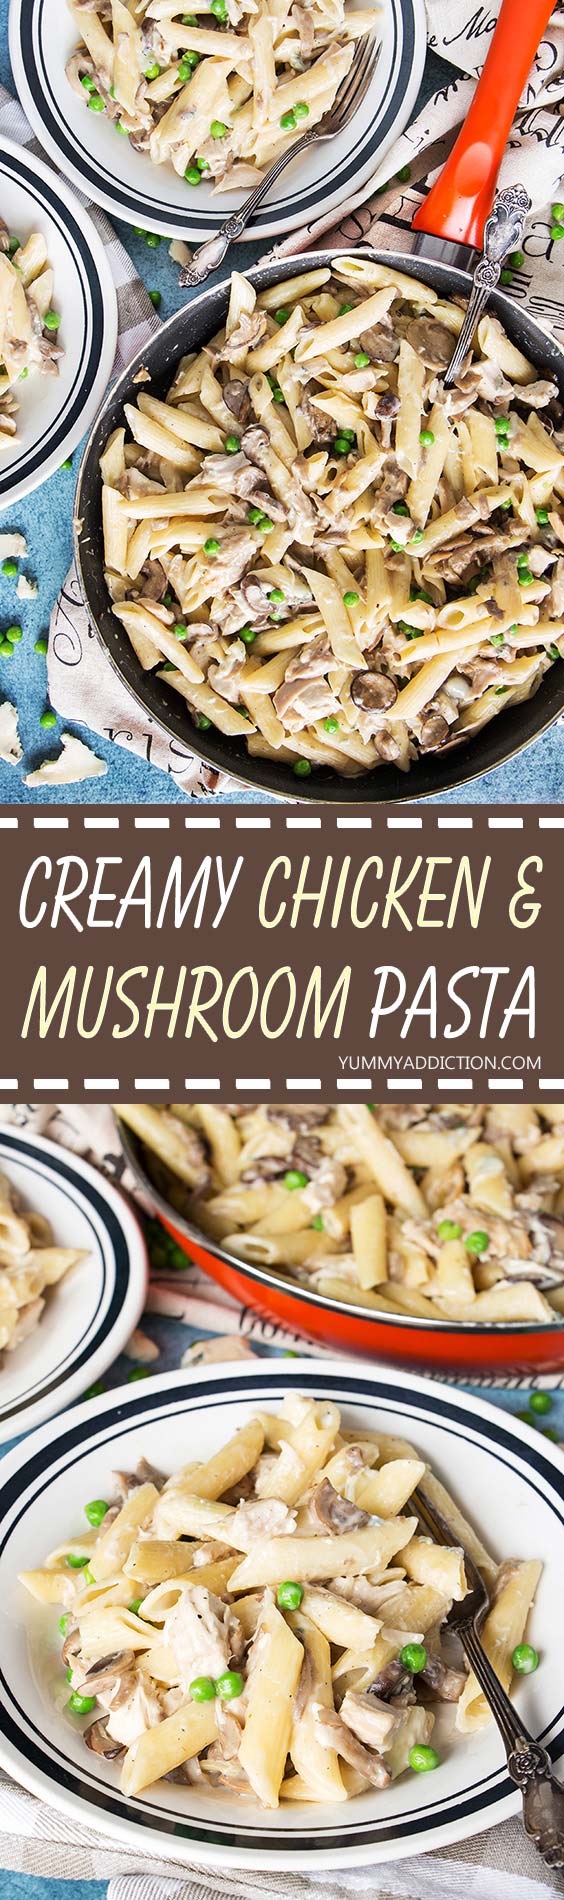 This Creamy Chicken and Mushroom Pasta is tossed in a heavenly blue cheese sauce to create a comforting, hearty, and full of flavor family meal! | yummyaddiction.com